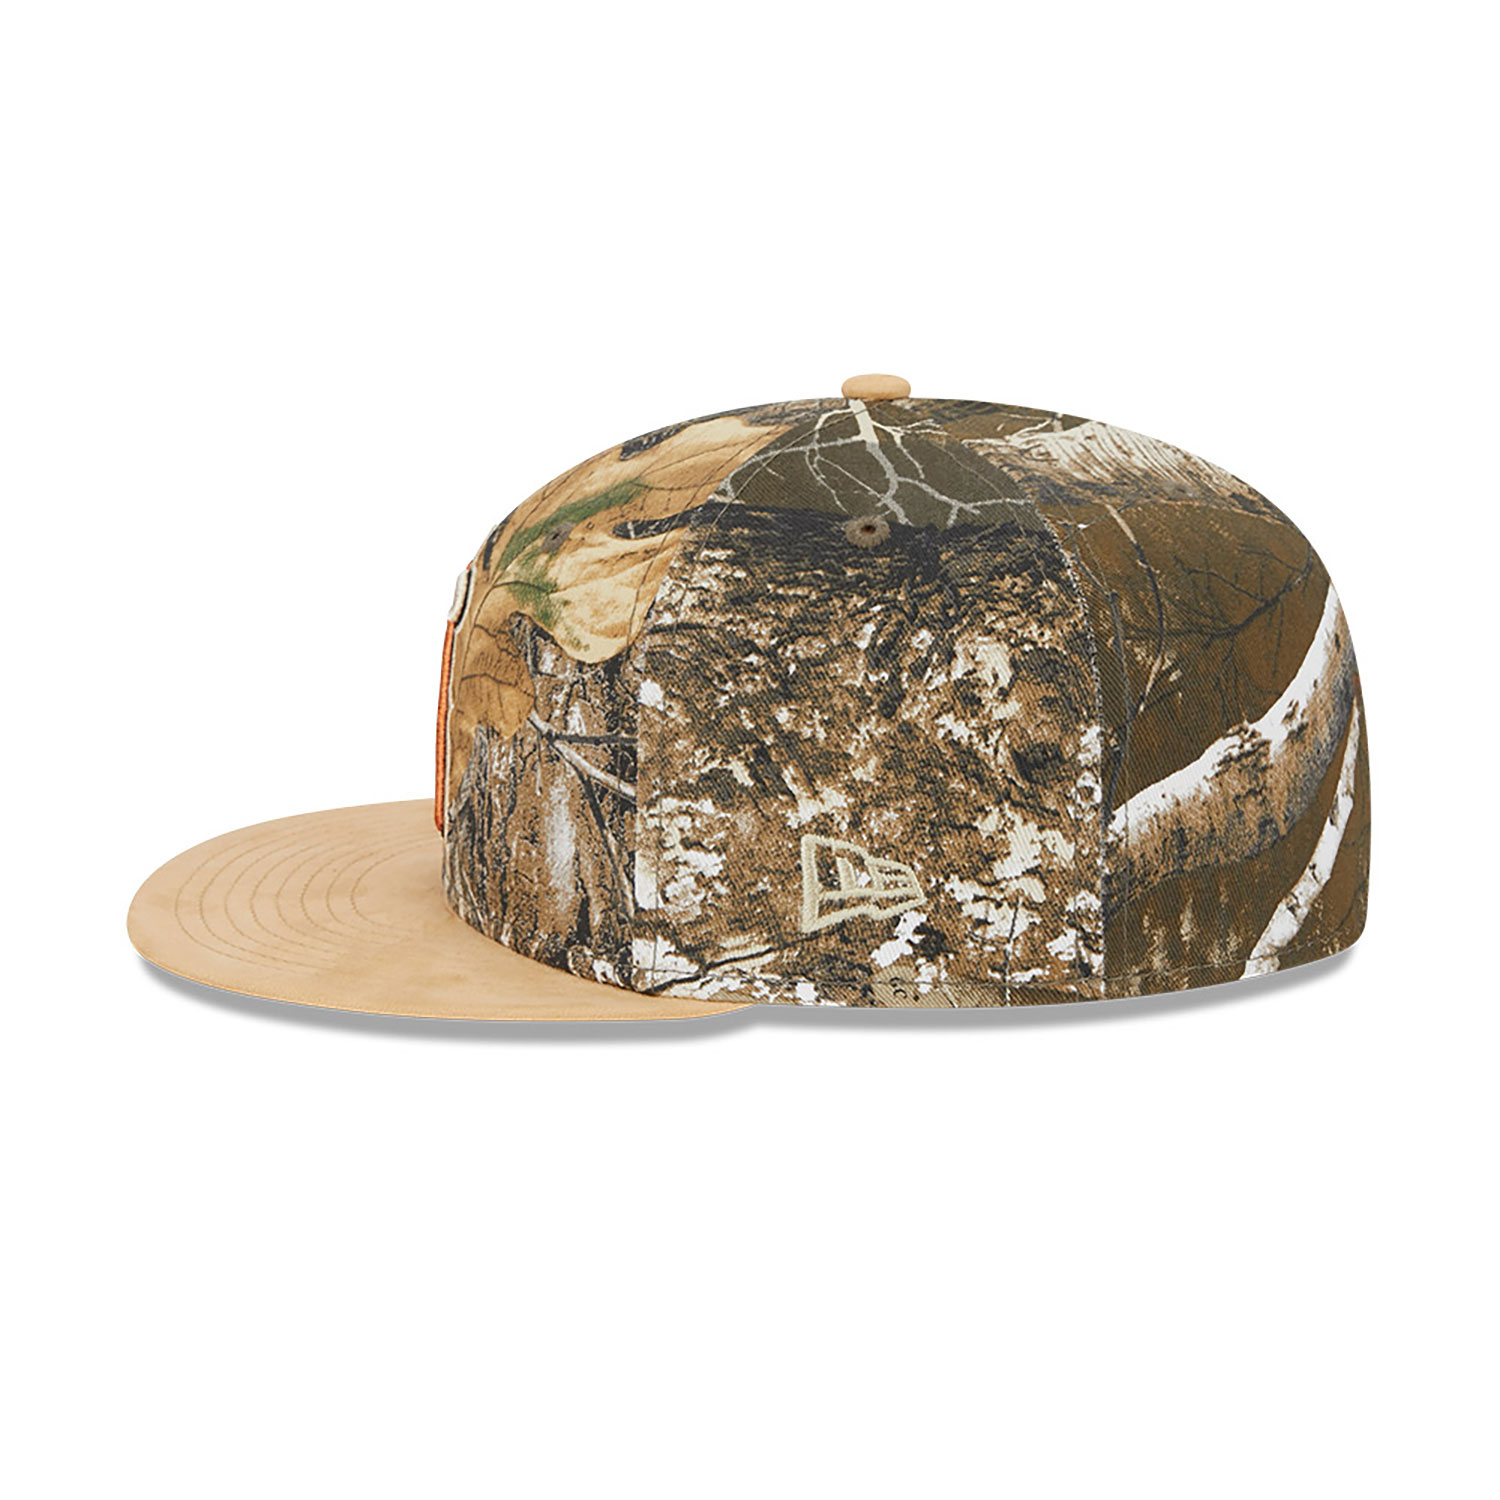 LA Angels MLB Real Tree Camo Print 59FIFTY Fitted Cap